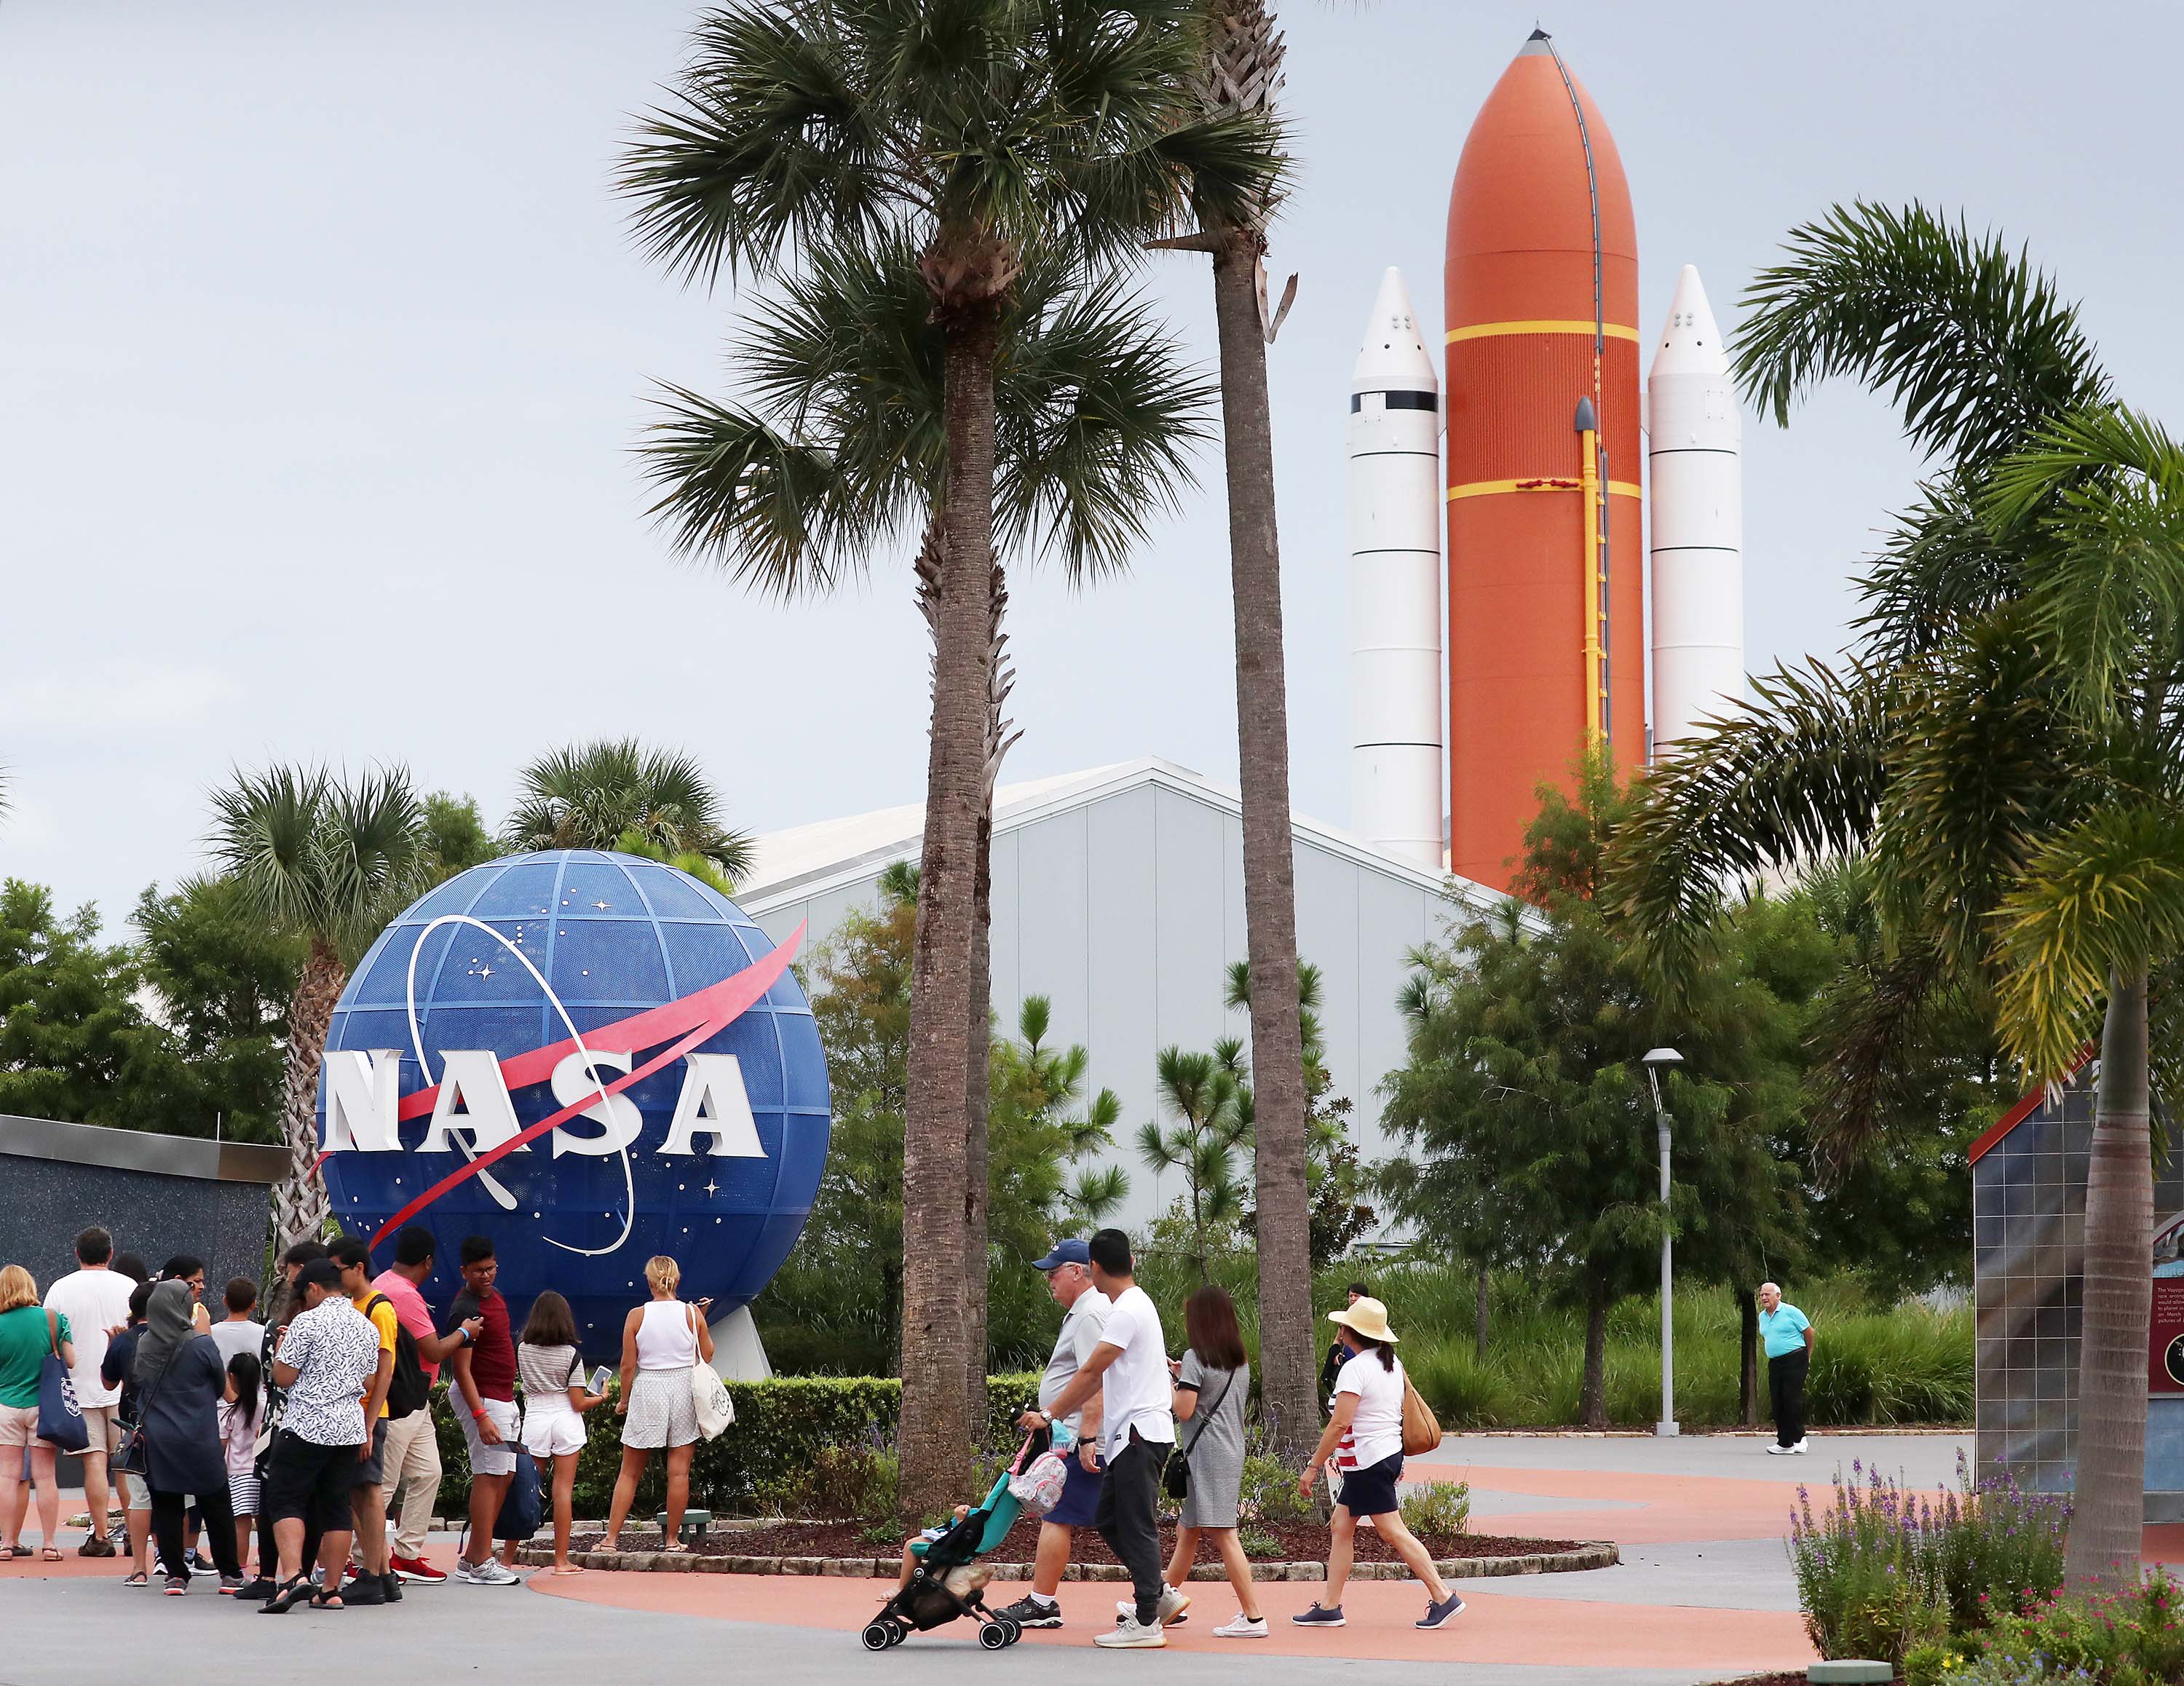 People visit the Kennedy Space Center Visitor Complex in Cape Canaveral, Florida in August 2019.